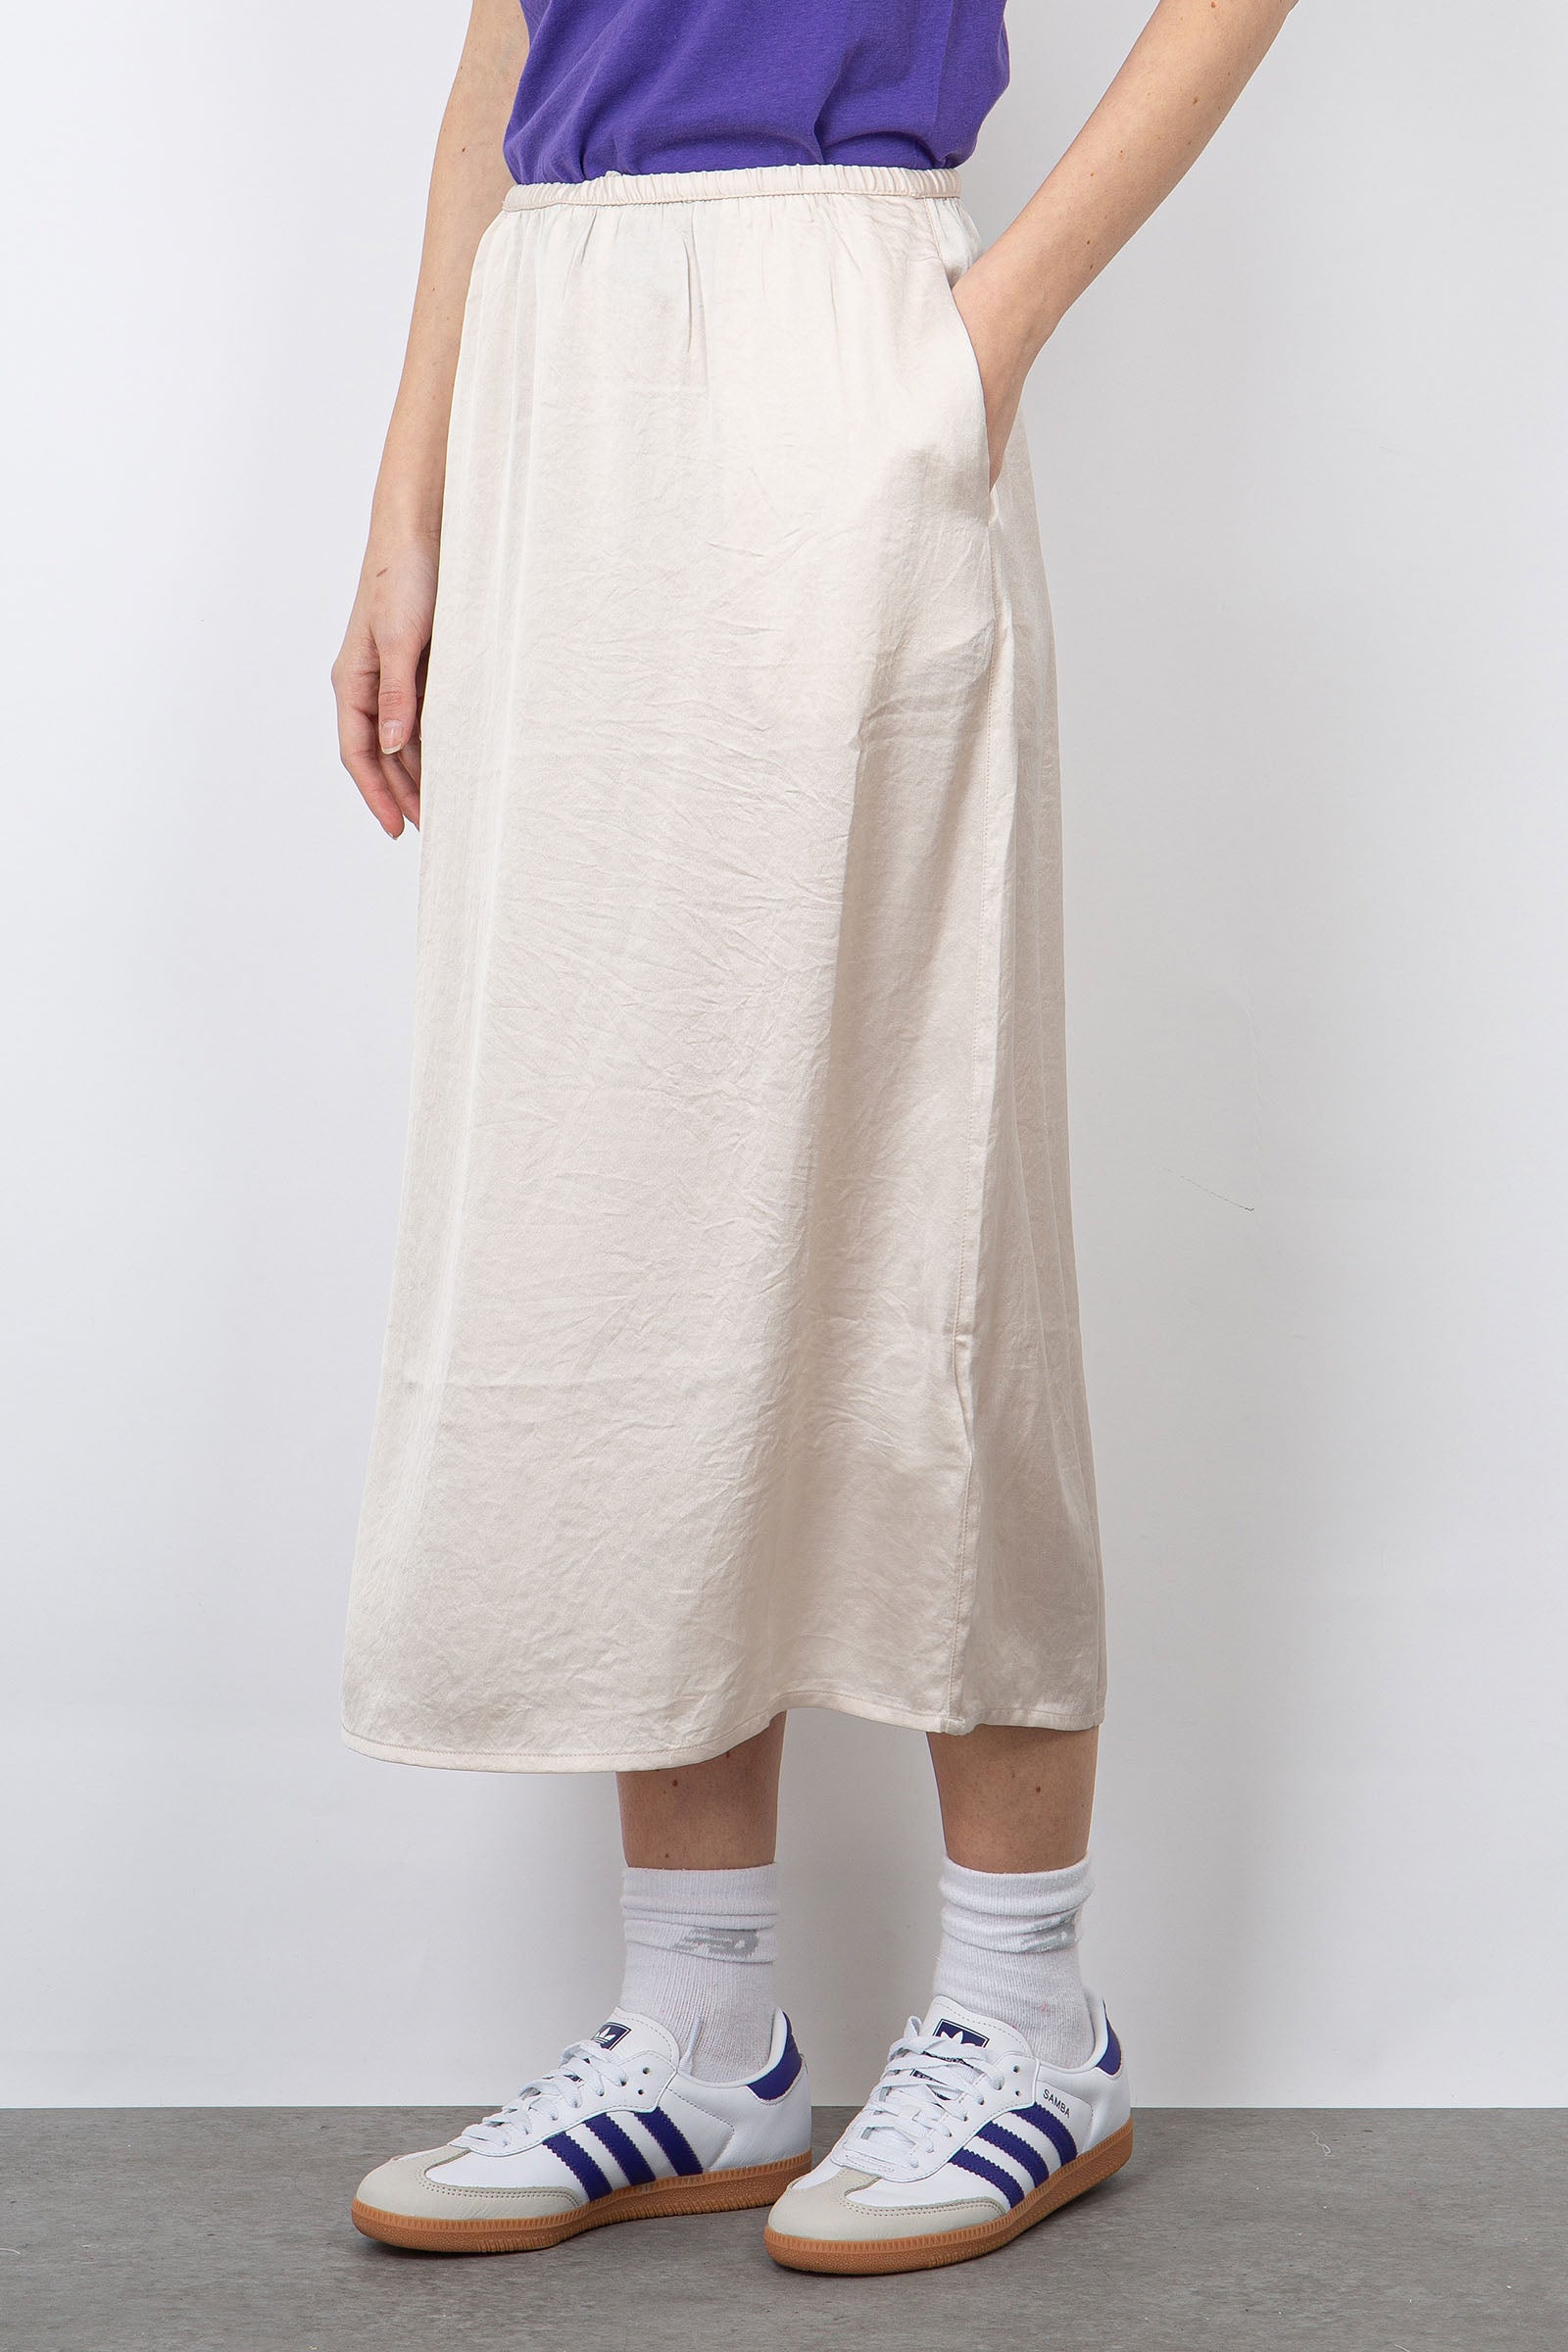 American Vintage Widland Synthetic Skirt Ivory - 4